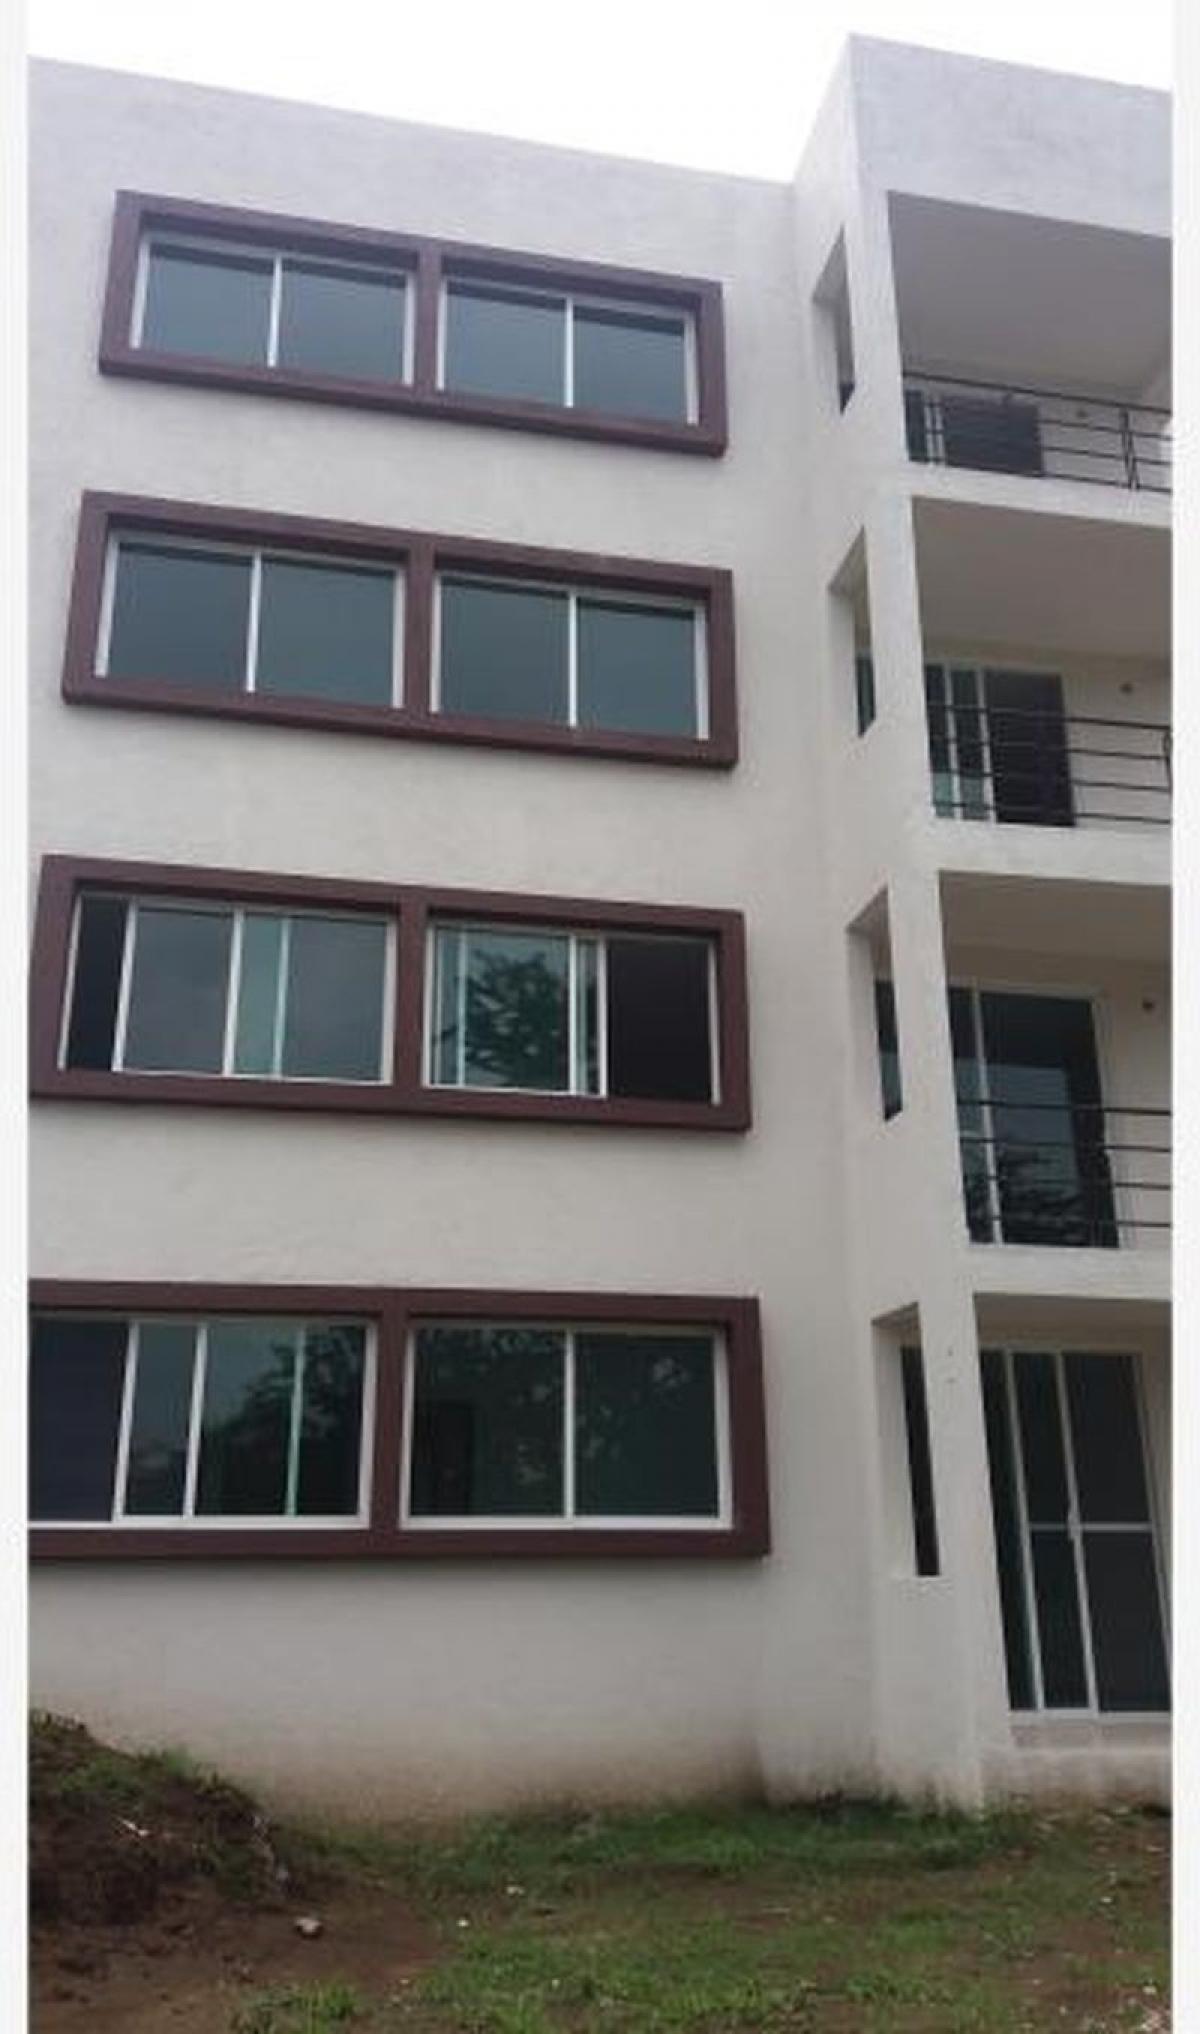 Picture of Apartment For Sale in Yautepec, Morelos, Mexico